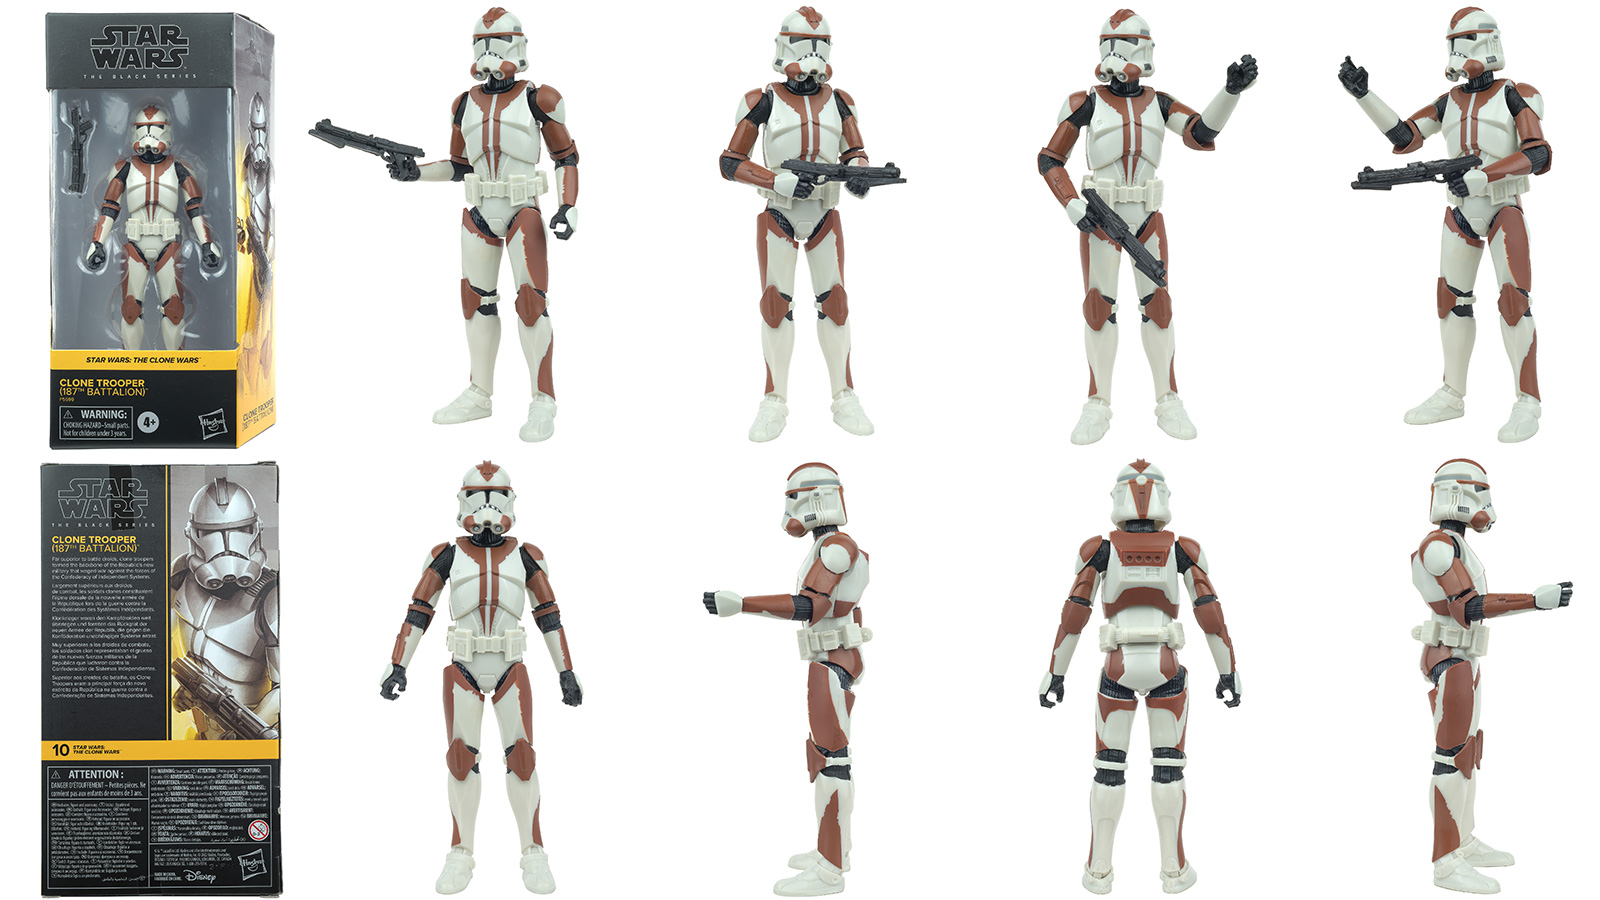 New Photos - Walgreens Exclusive The Black Series 6-Inch 10: Clonetrooper (187th Battalion)